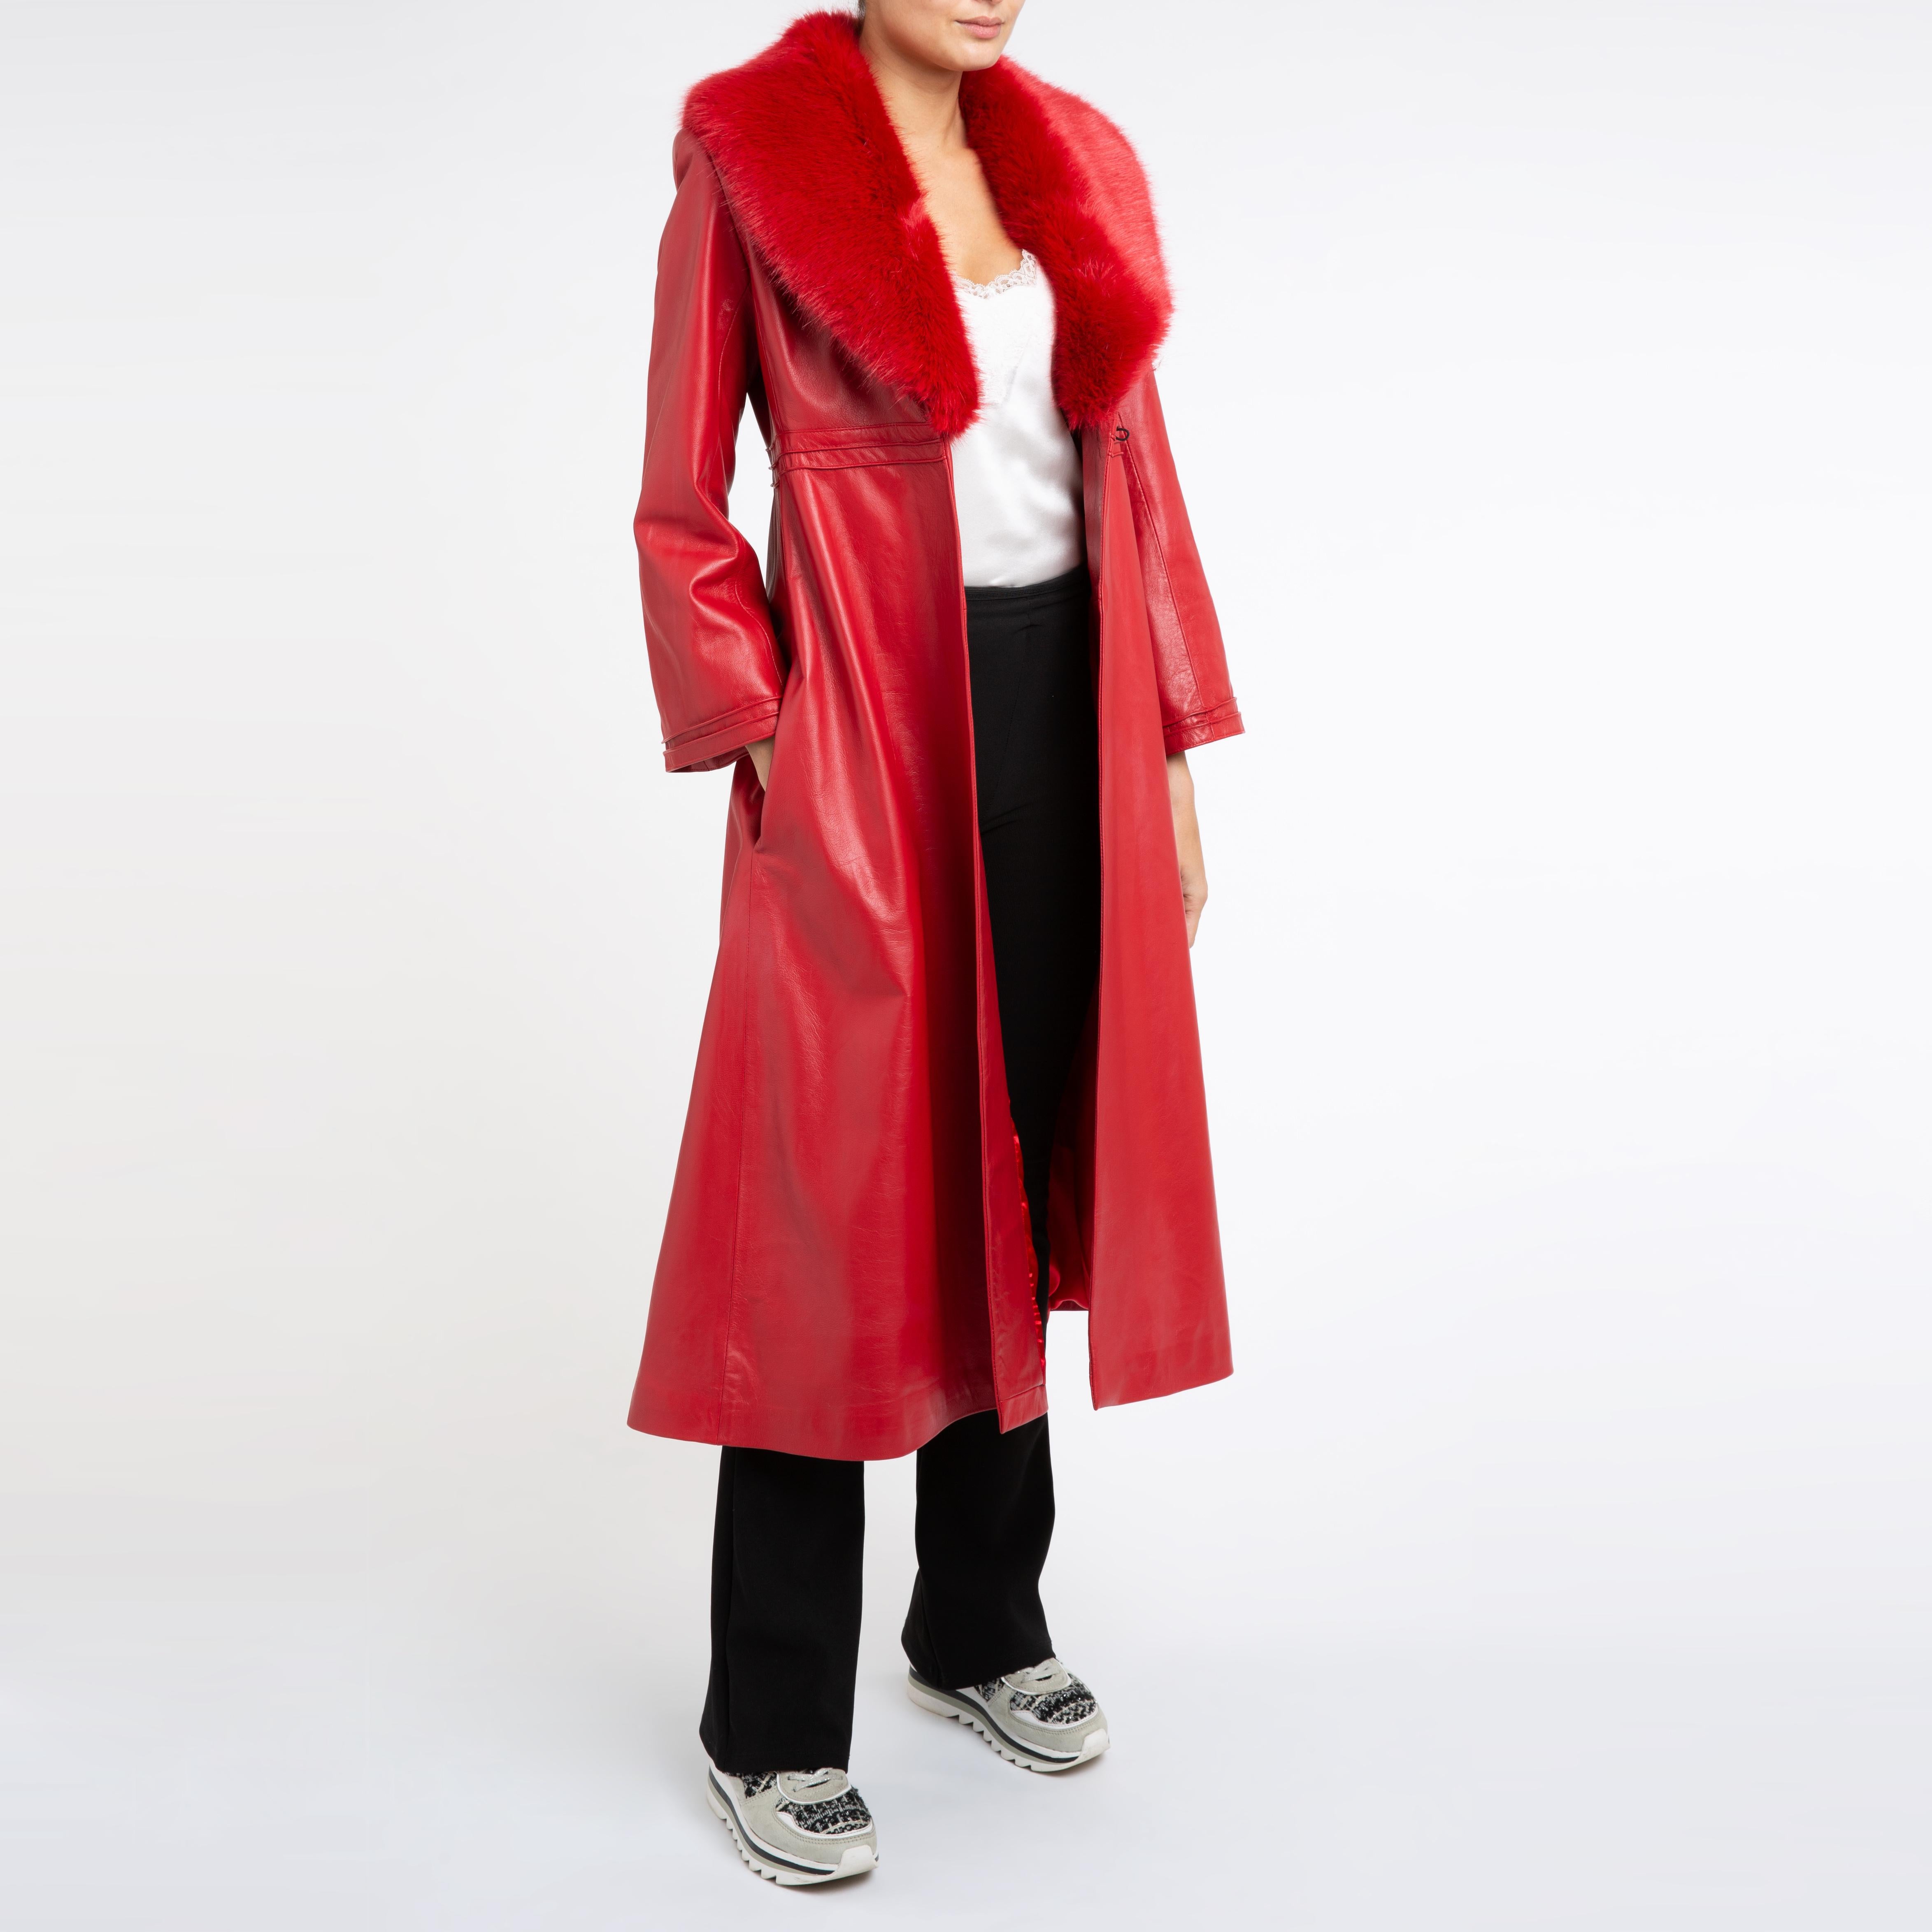 Verheyen London Edward Leather Coat with Faux Fur Collar in Red - Size uk 12 For Sale 3